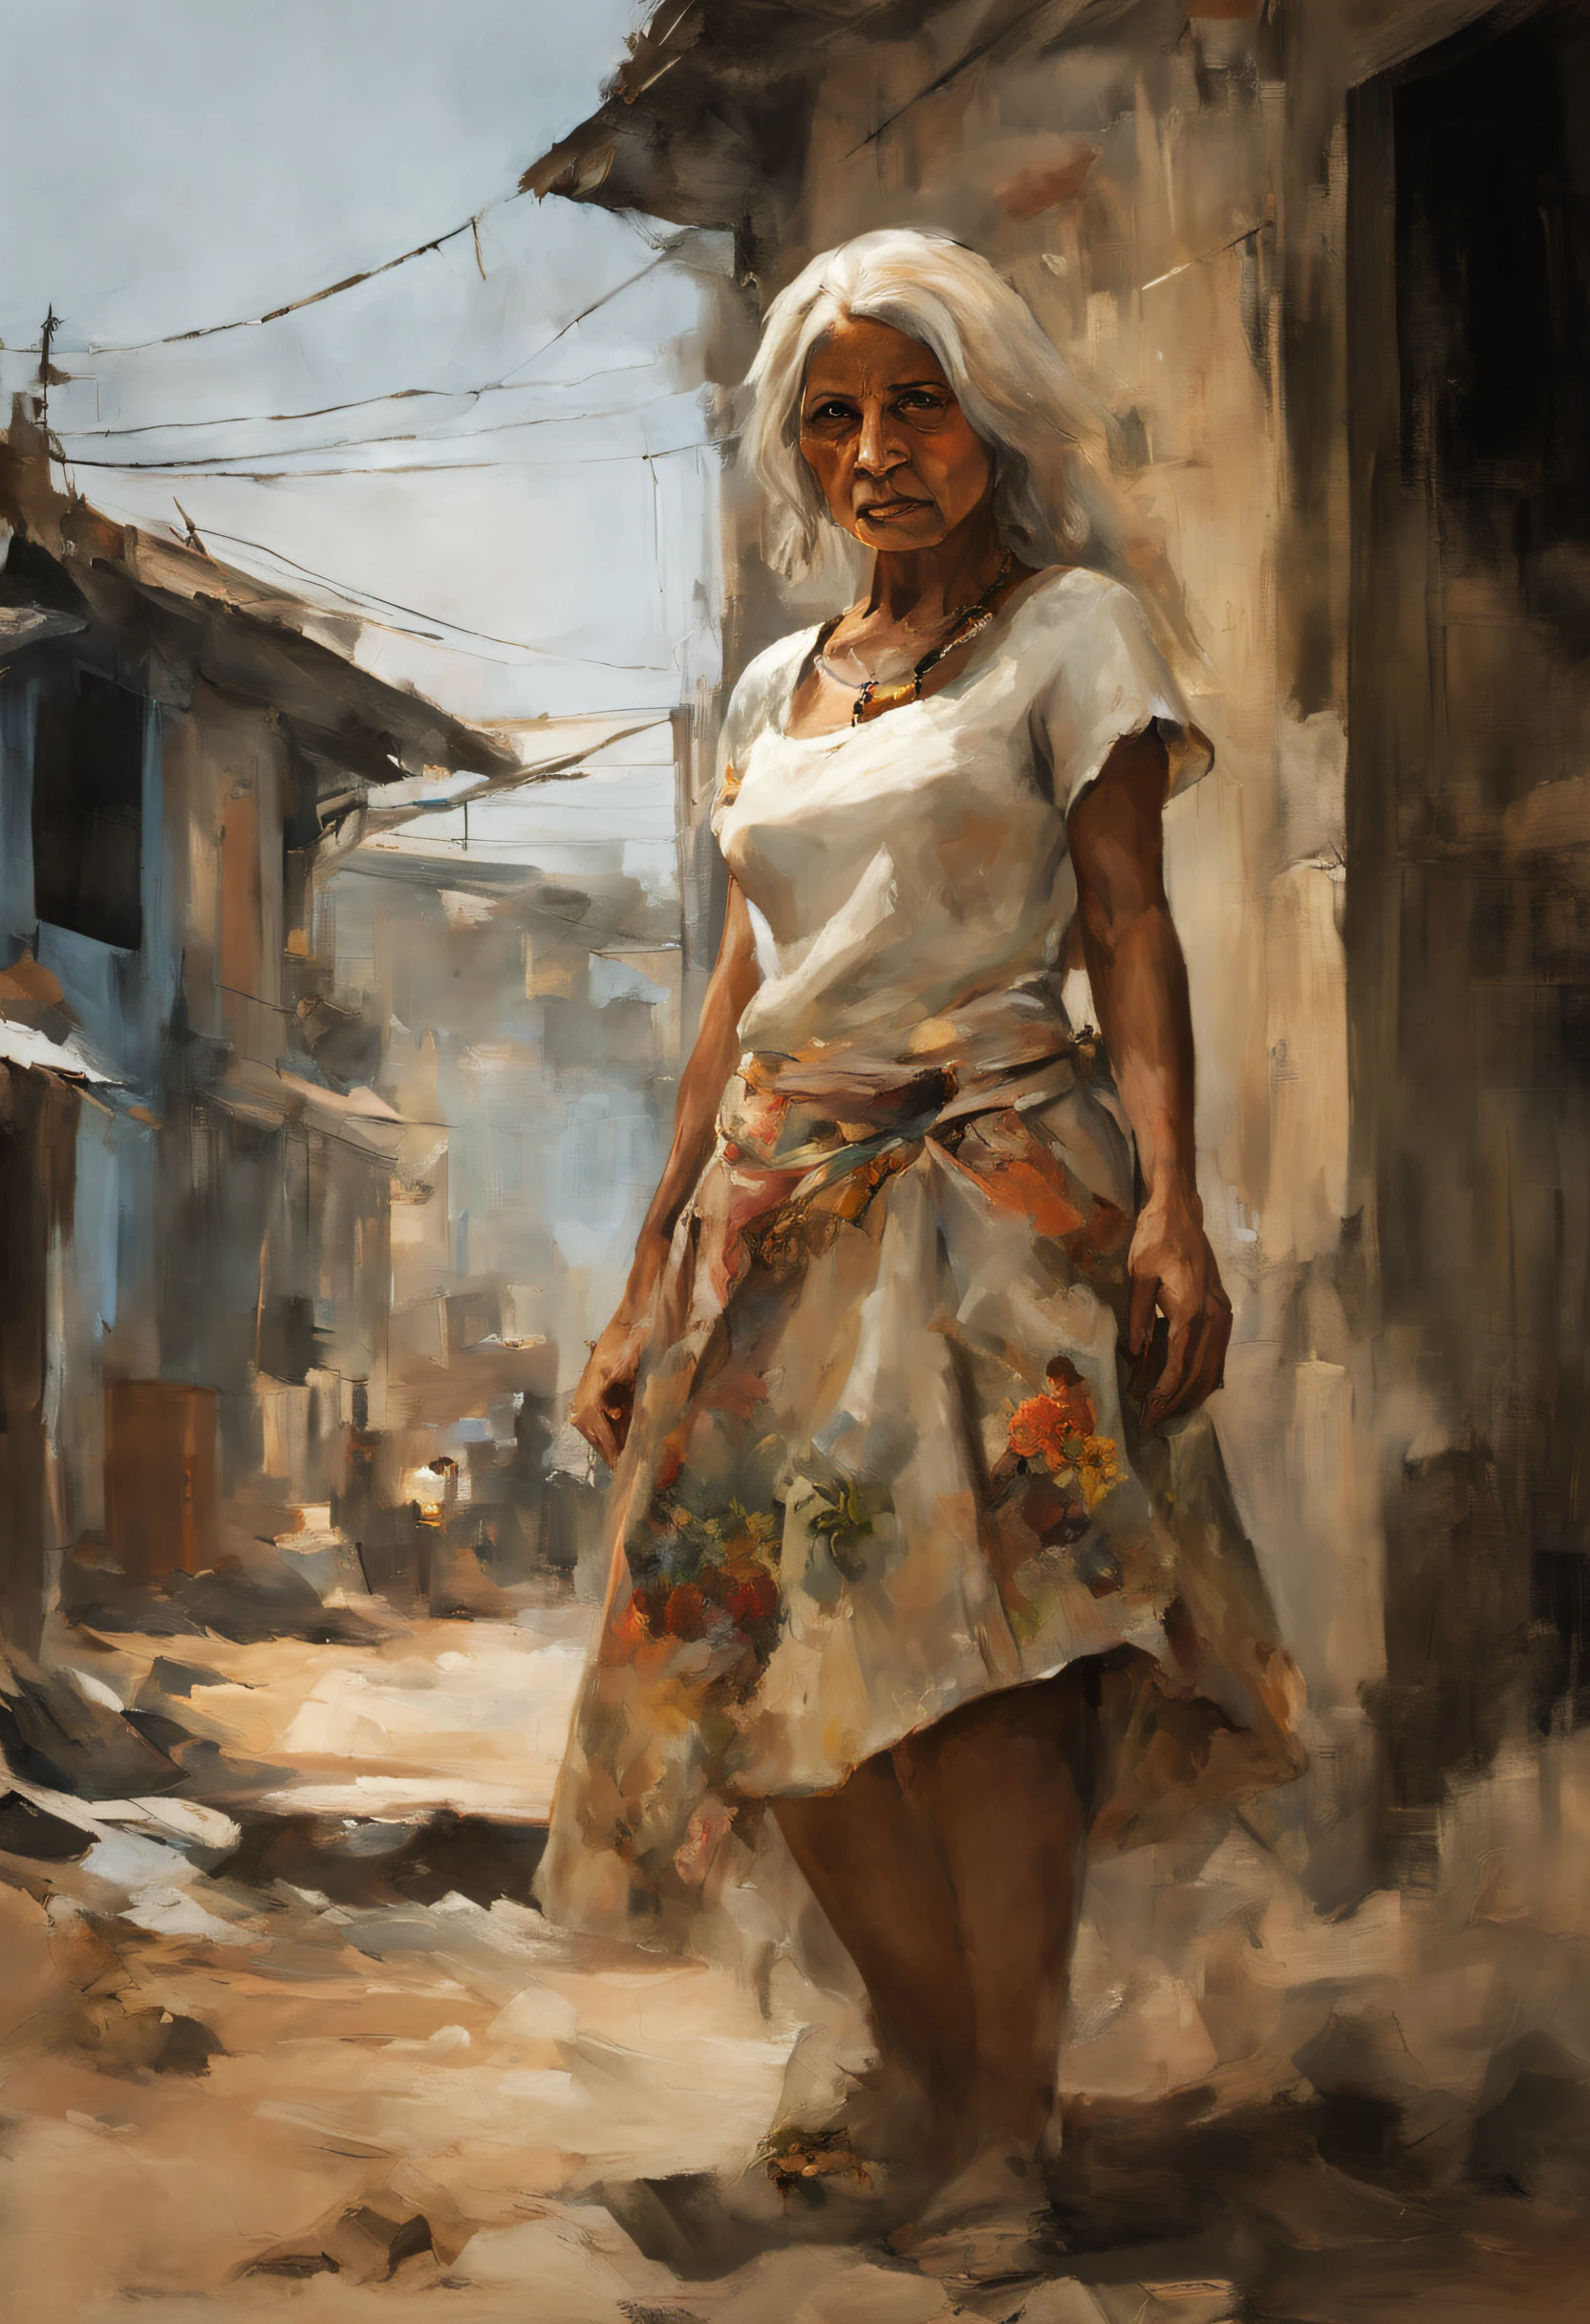 Dona Maria, a 76-year-old favela resident, depressed in her humble shack, showing off her slender, aged body. She wears everyday clothes, emphasizing her weather-beaten olive skin, white hair, and deep-set brown eyes. The setting takes place in a favela shack, with morbid colors and despondent sounds, creating a depressive atmosphere. Full body view of Dona Maria, a traditional Brazilian coffee on the table. The photography captures the authenticity of Dona Maria's life with sharp focus, natural lighting and high-resolution imaging, highlighting the genuine emotions in her eyes and the decaying environment of the favela. Dona Maria wears a modest yet personality-filled dress, made of sturdy cotton in earthy tones with delicate floral patterns. The cuegant, with short sleeves and handcrafted details, reflecting a life dedicated to overcoming. The length reaches her ankles, and she accessorizes the look with accessories like a beaded necklace and a distressed leather bracelet. This dress not just a piece of clothing, but a testimony to Dona Maria's history and resistance. "Create an oil painting inspired by the gestural style, incorporating the oil painting technique with bold and expressive brushstrokes. Highlight organic and gestural shapes, with blurred contours, low color saturation and obvious complementary colors.""Produce an oil painting in the style of Monet's impressionism. Capture the light, ephemeral atmosphere with loose brushstrokes, blurred outlines, low color saturation, and an emphasis on complementary colors to create an artistic and evocative scene.""Develop an image with the style of an oil painting, emphasizing gestural brushstrokes. Choose diffuse contours, reduced color saturation and emphasis on complementary colors in an evident way, resulting in a unique and inspiring artistic composition."